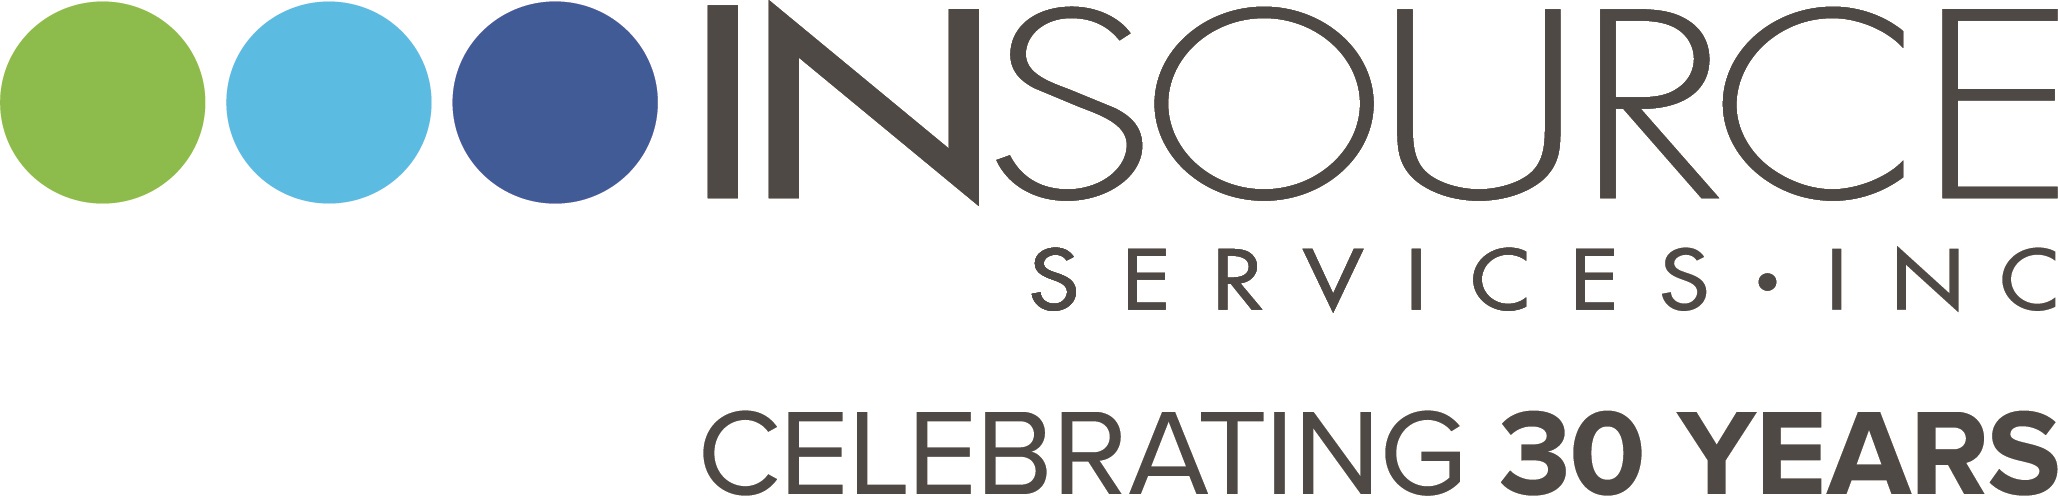 Insource Services logo